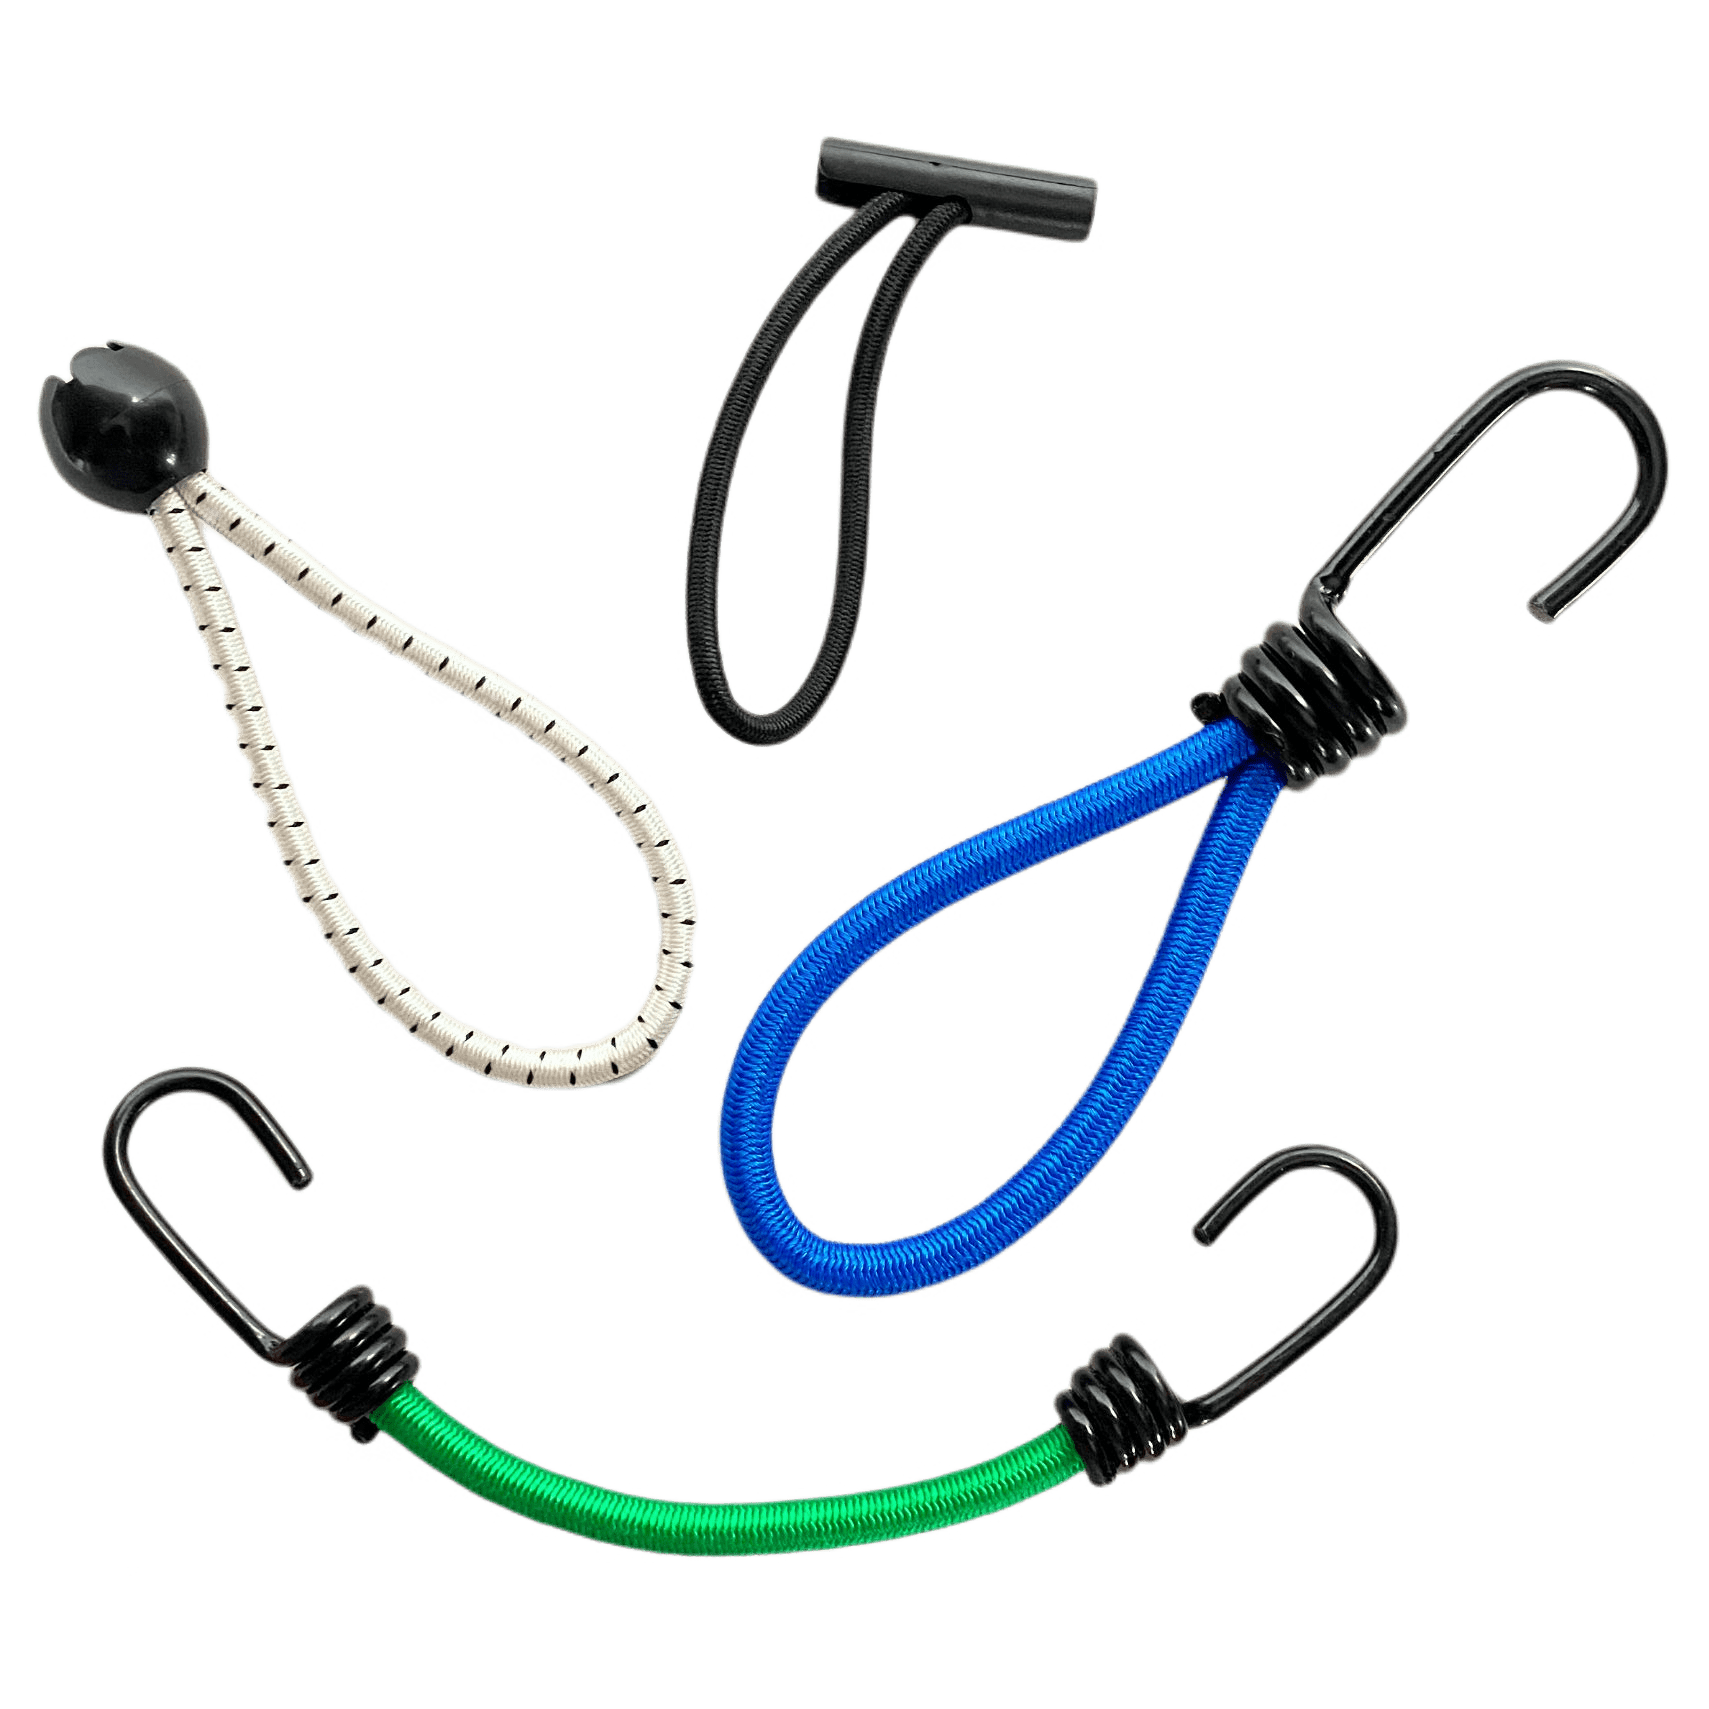 Flat bungee cords fitting double wire hooks